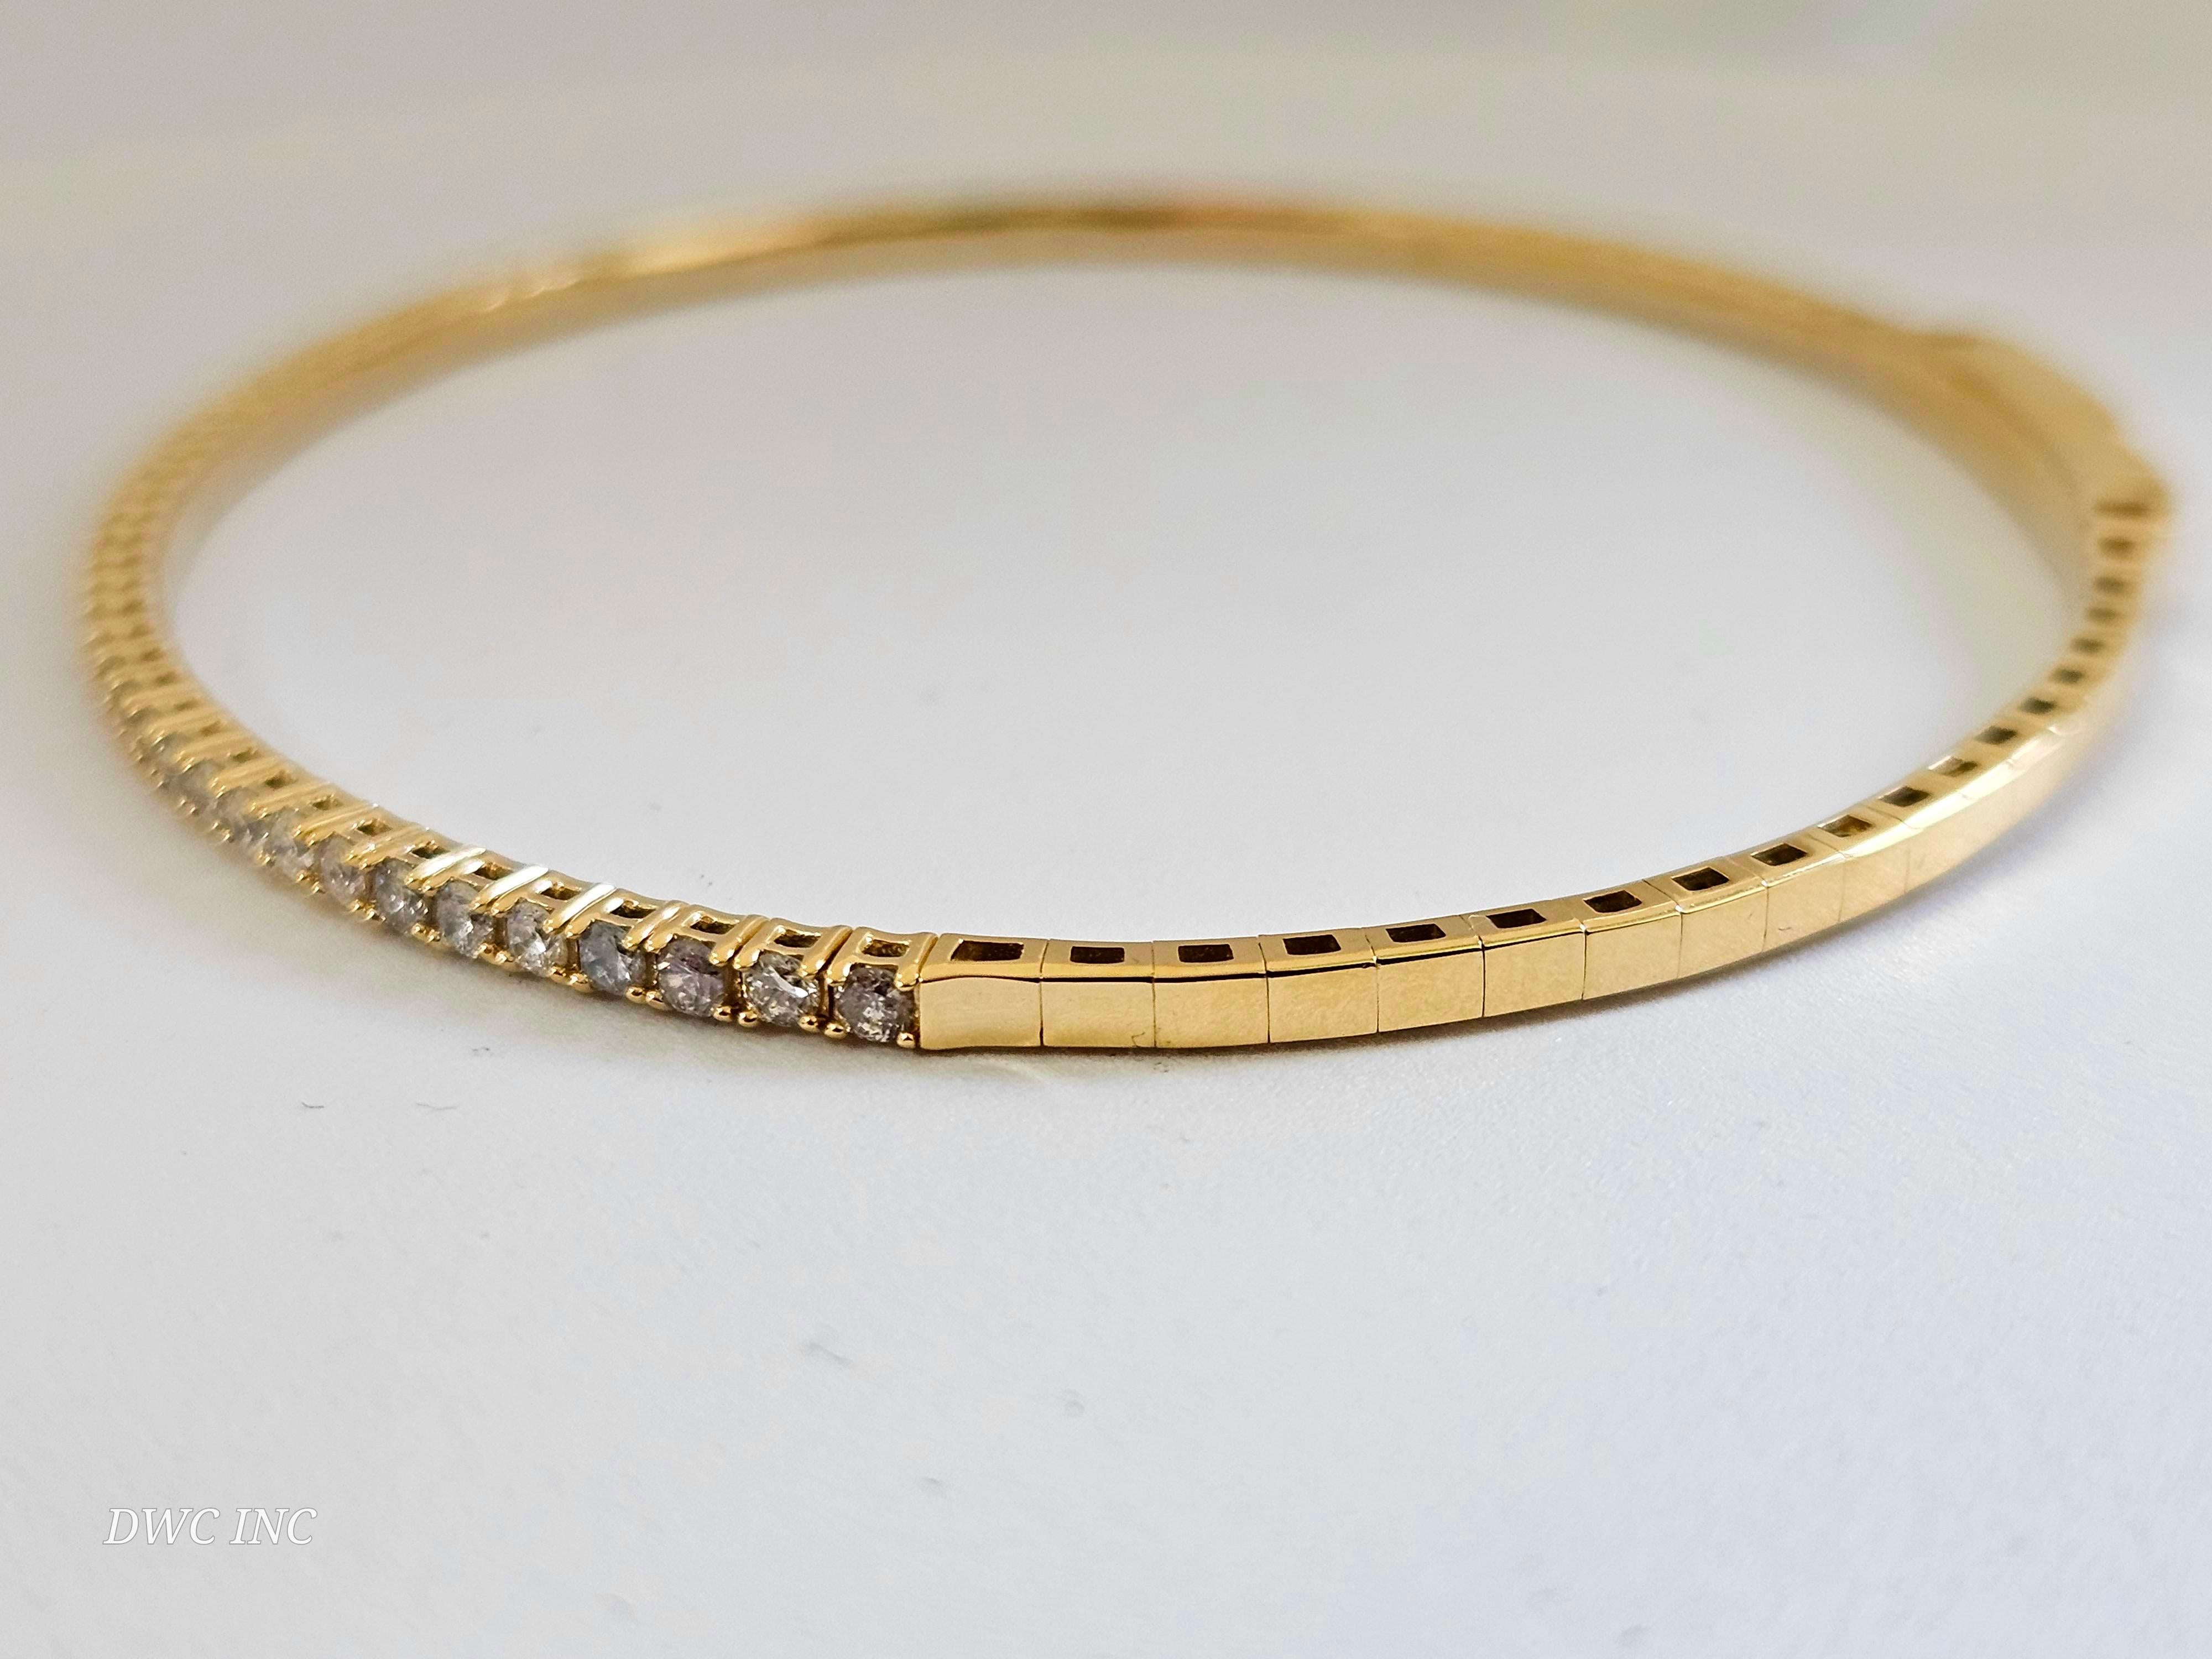 0.85 Carat Round Brilliant Cut Diamond Mini bangle Bracelet 14 Karat Yellow Gold In New Condition For Sale In Great Neck, NY